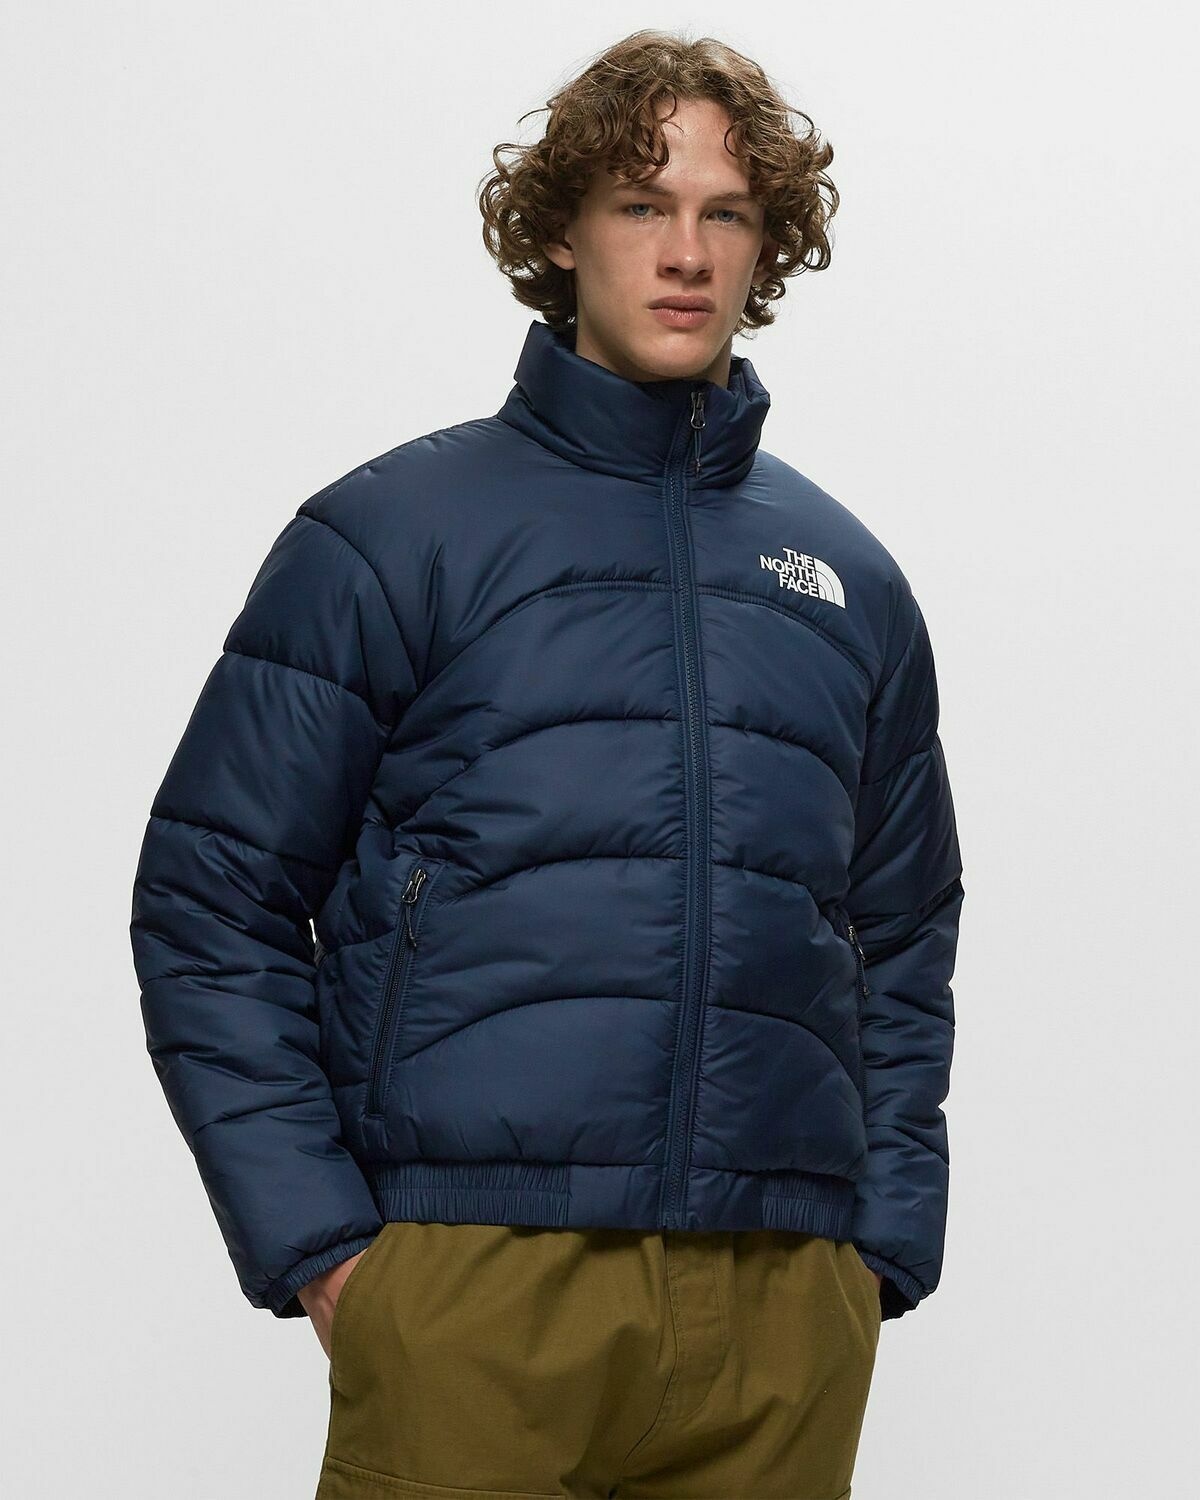 The North Face Jacket 2000 Blue - Mens - Down & Puffer Jackets The ...